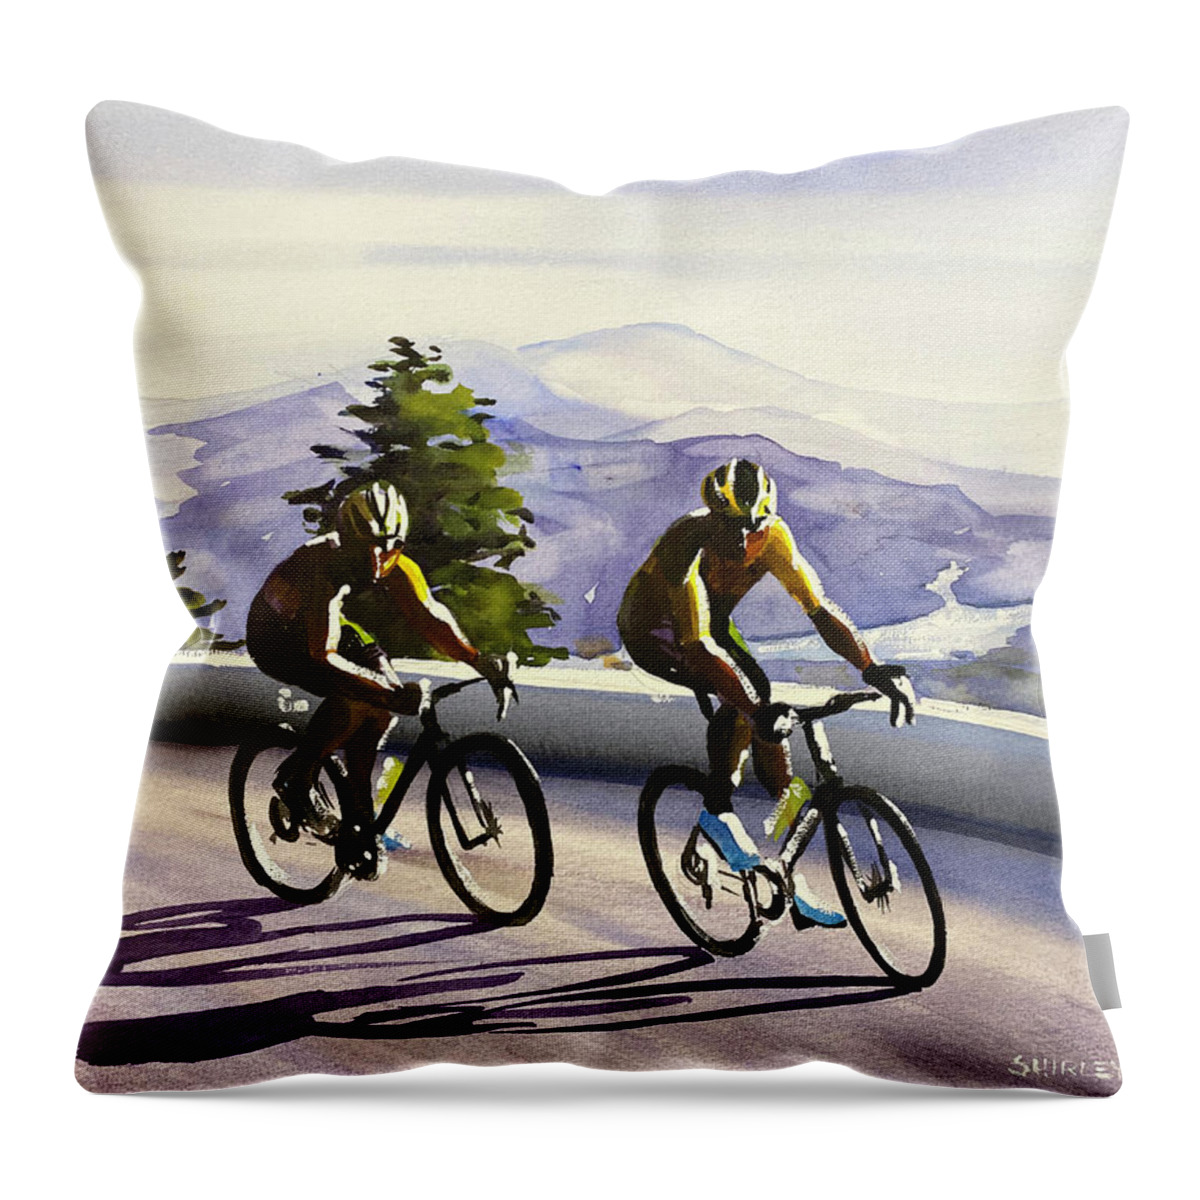 Letour Throw Pillow featuring the painting Climbing The Grand Colombier by Shirley Peters